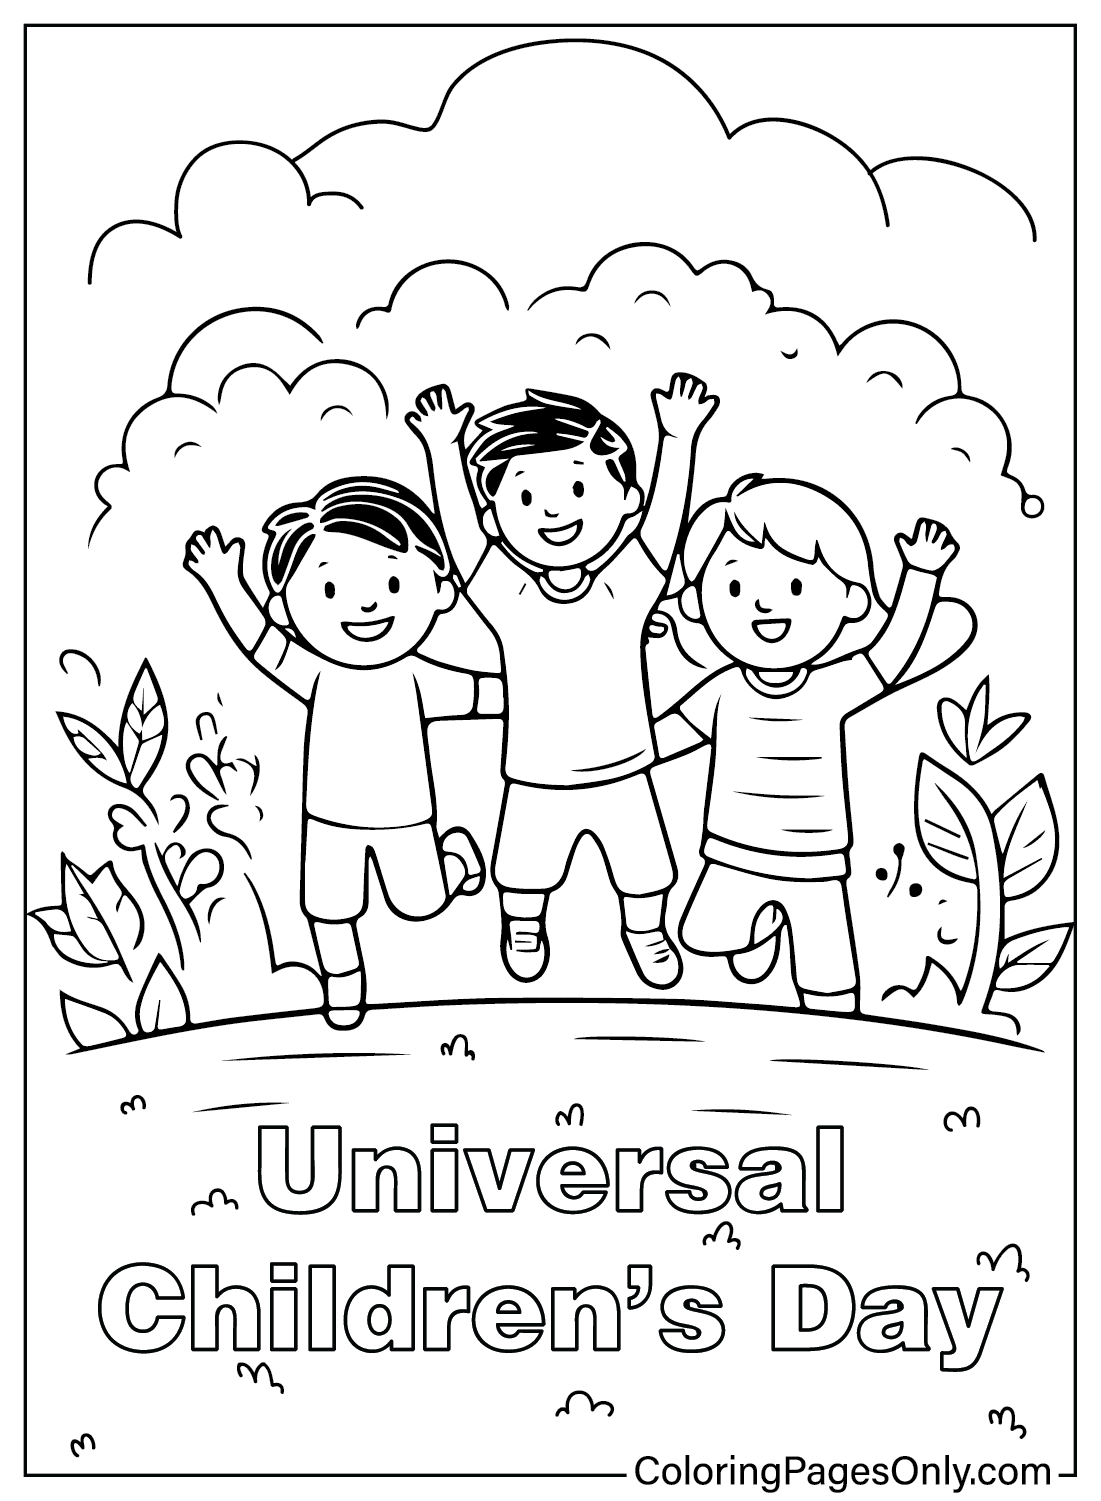 Universal Children’s Day Coloring Page from Children's Day